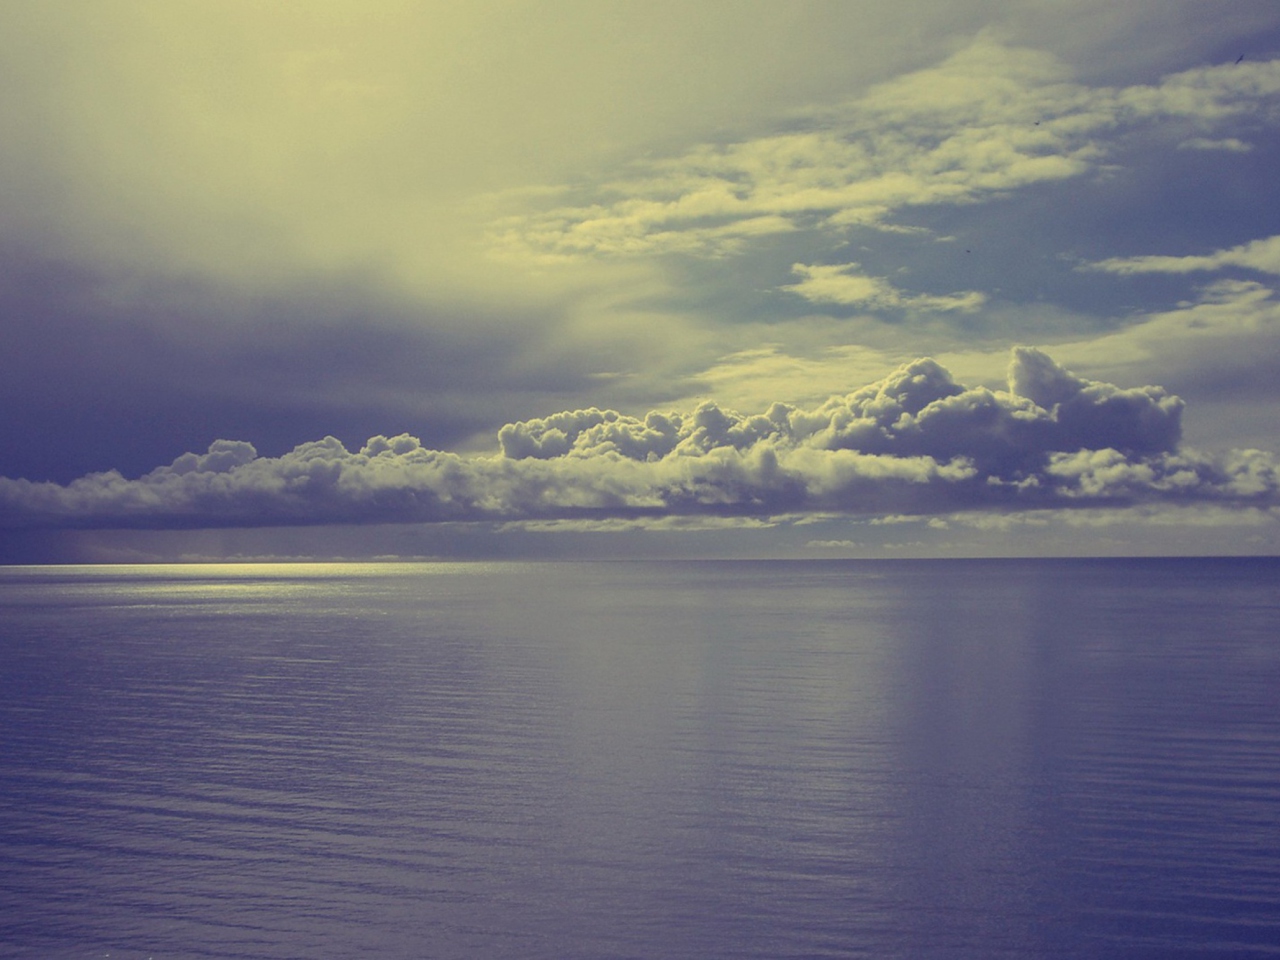 Sea And Clouds wallpaper 1280x960